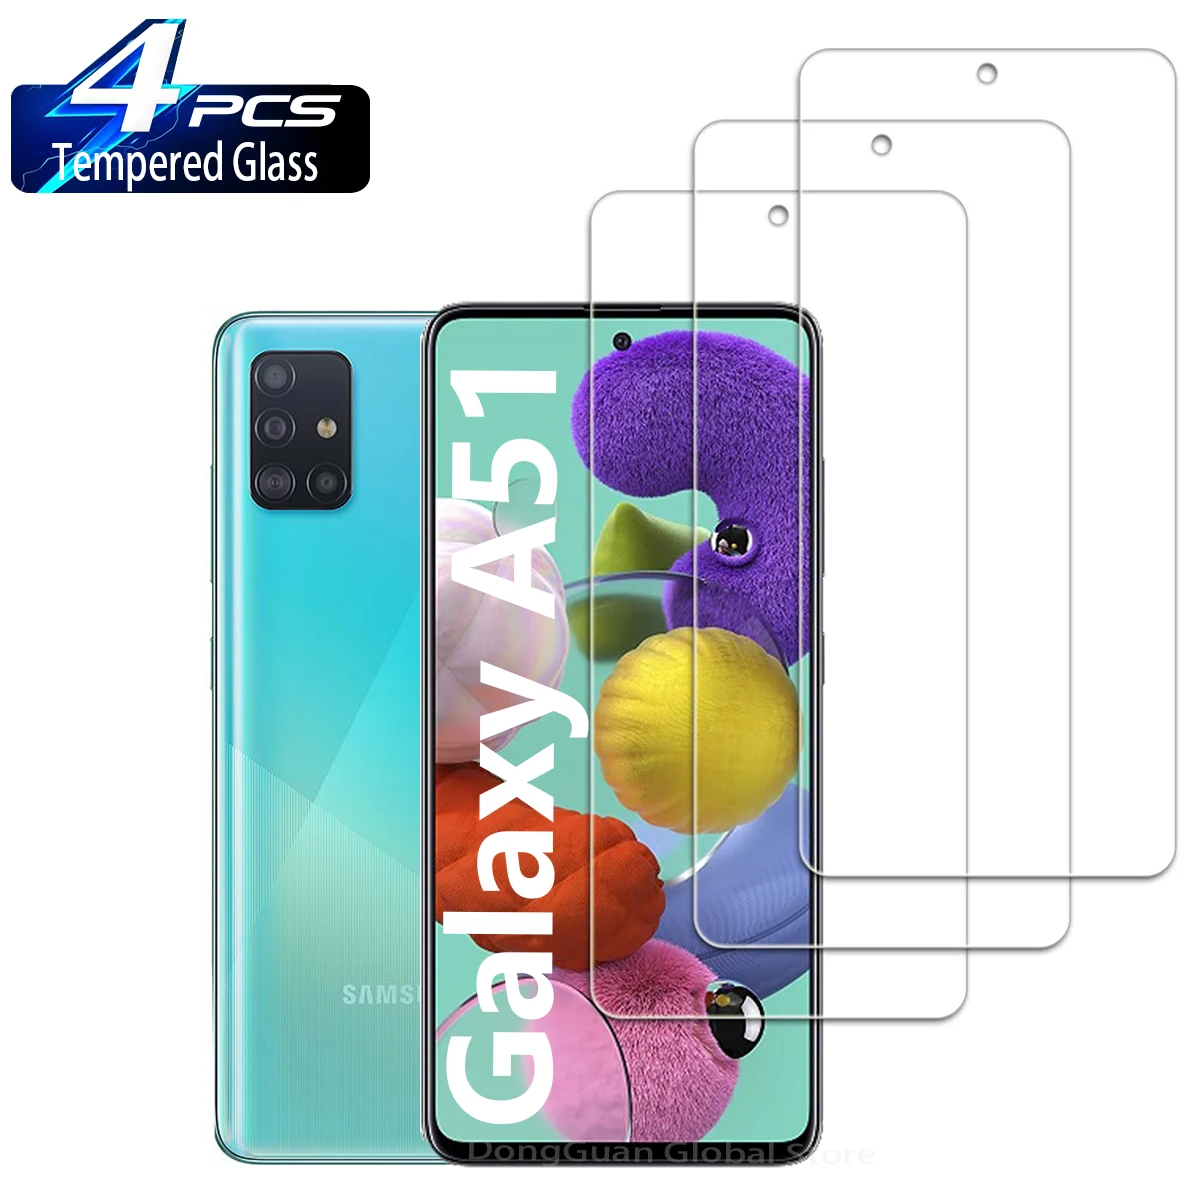 2/4Pcs Tempered Glass For Samsung Galaxy A51 Screen Protector Glass Film 3pcs tempered glass for samsung galaxy a02s glass screen protector glass tempered for samsung galaxy a01 core protective film